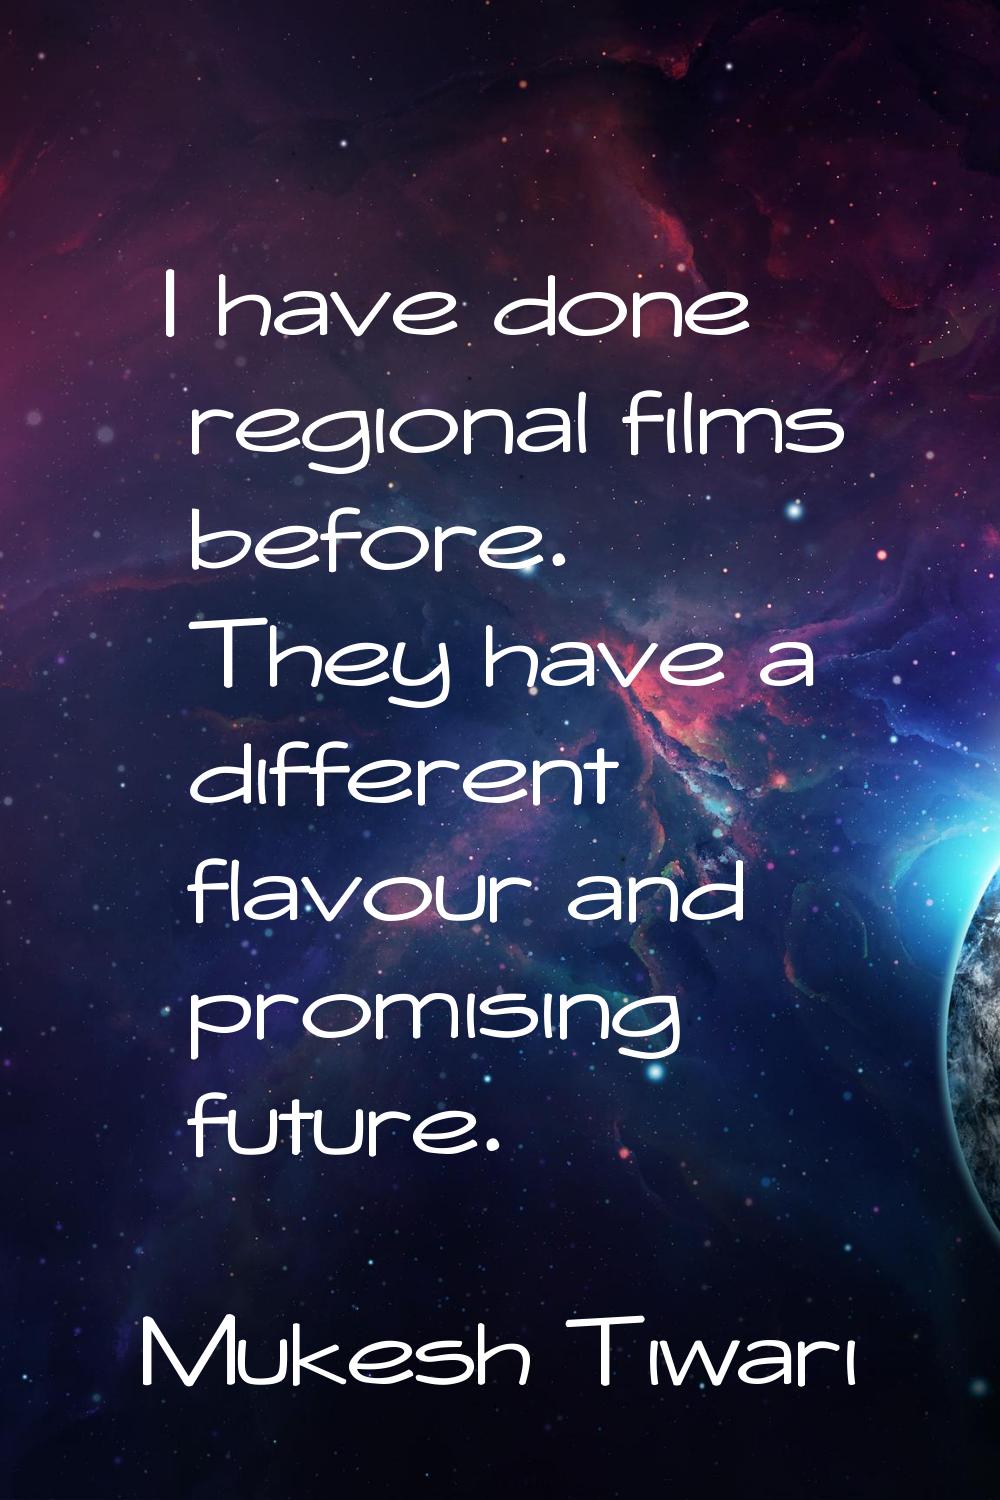 I have done regional films before. They have a different flavour and promising future.